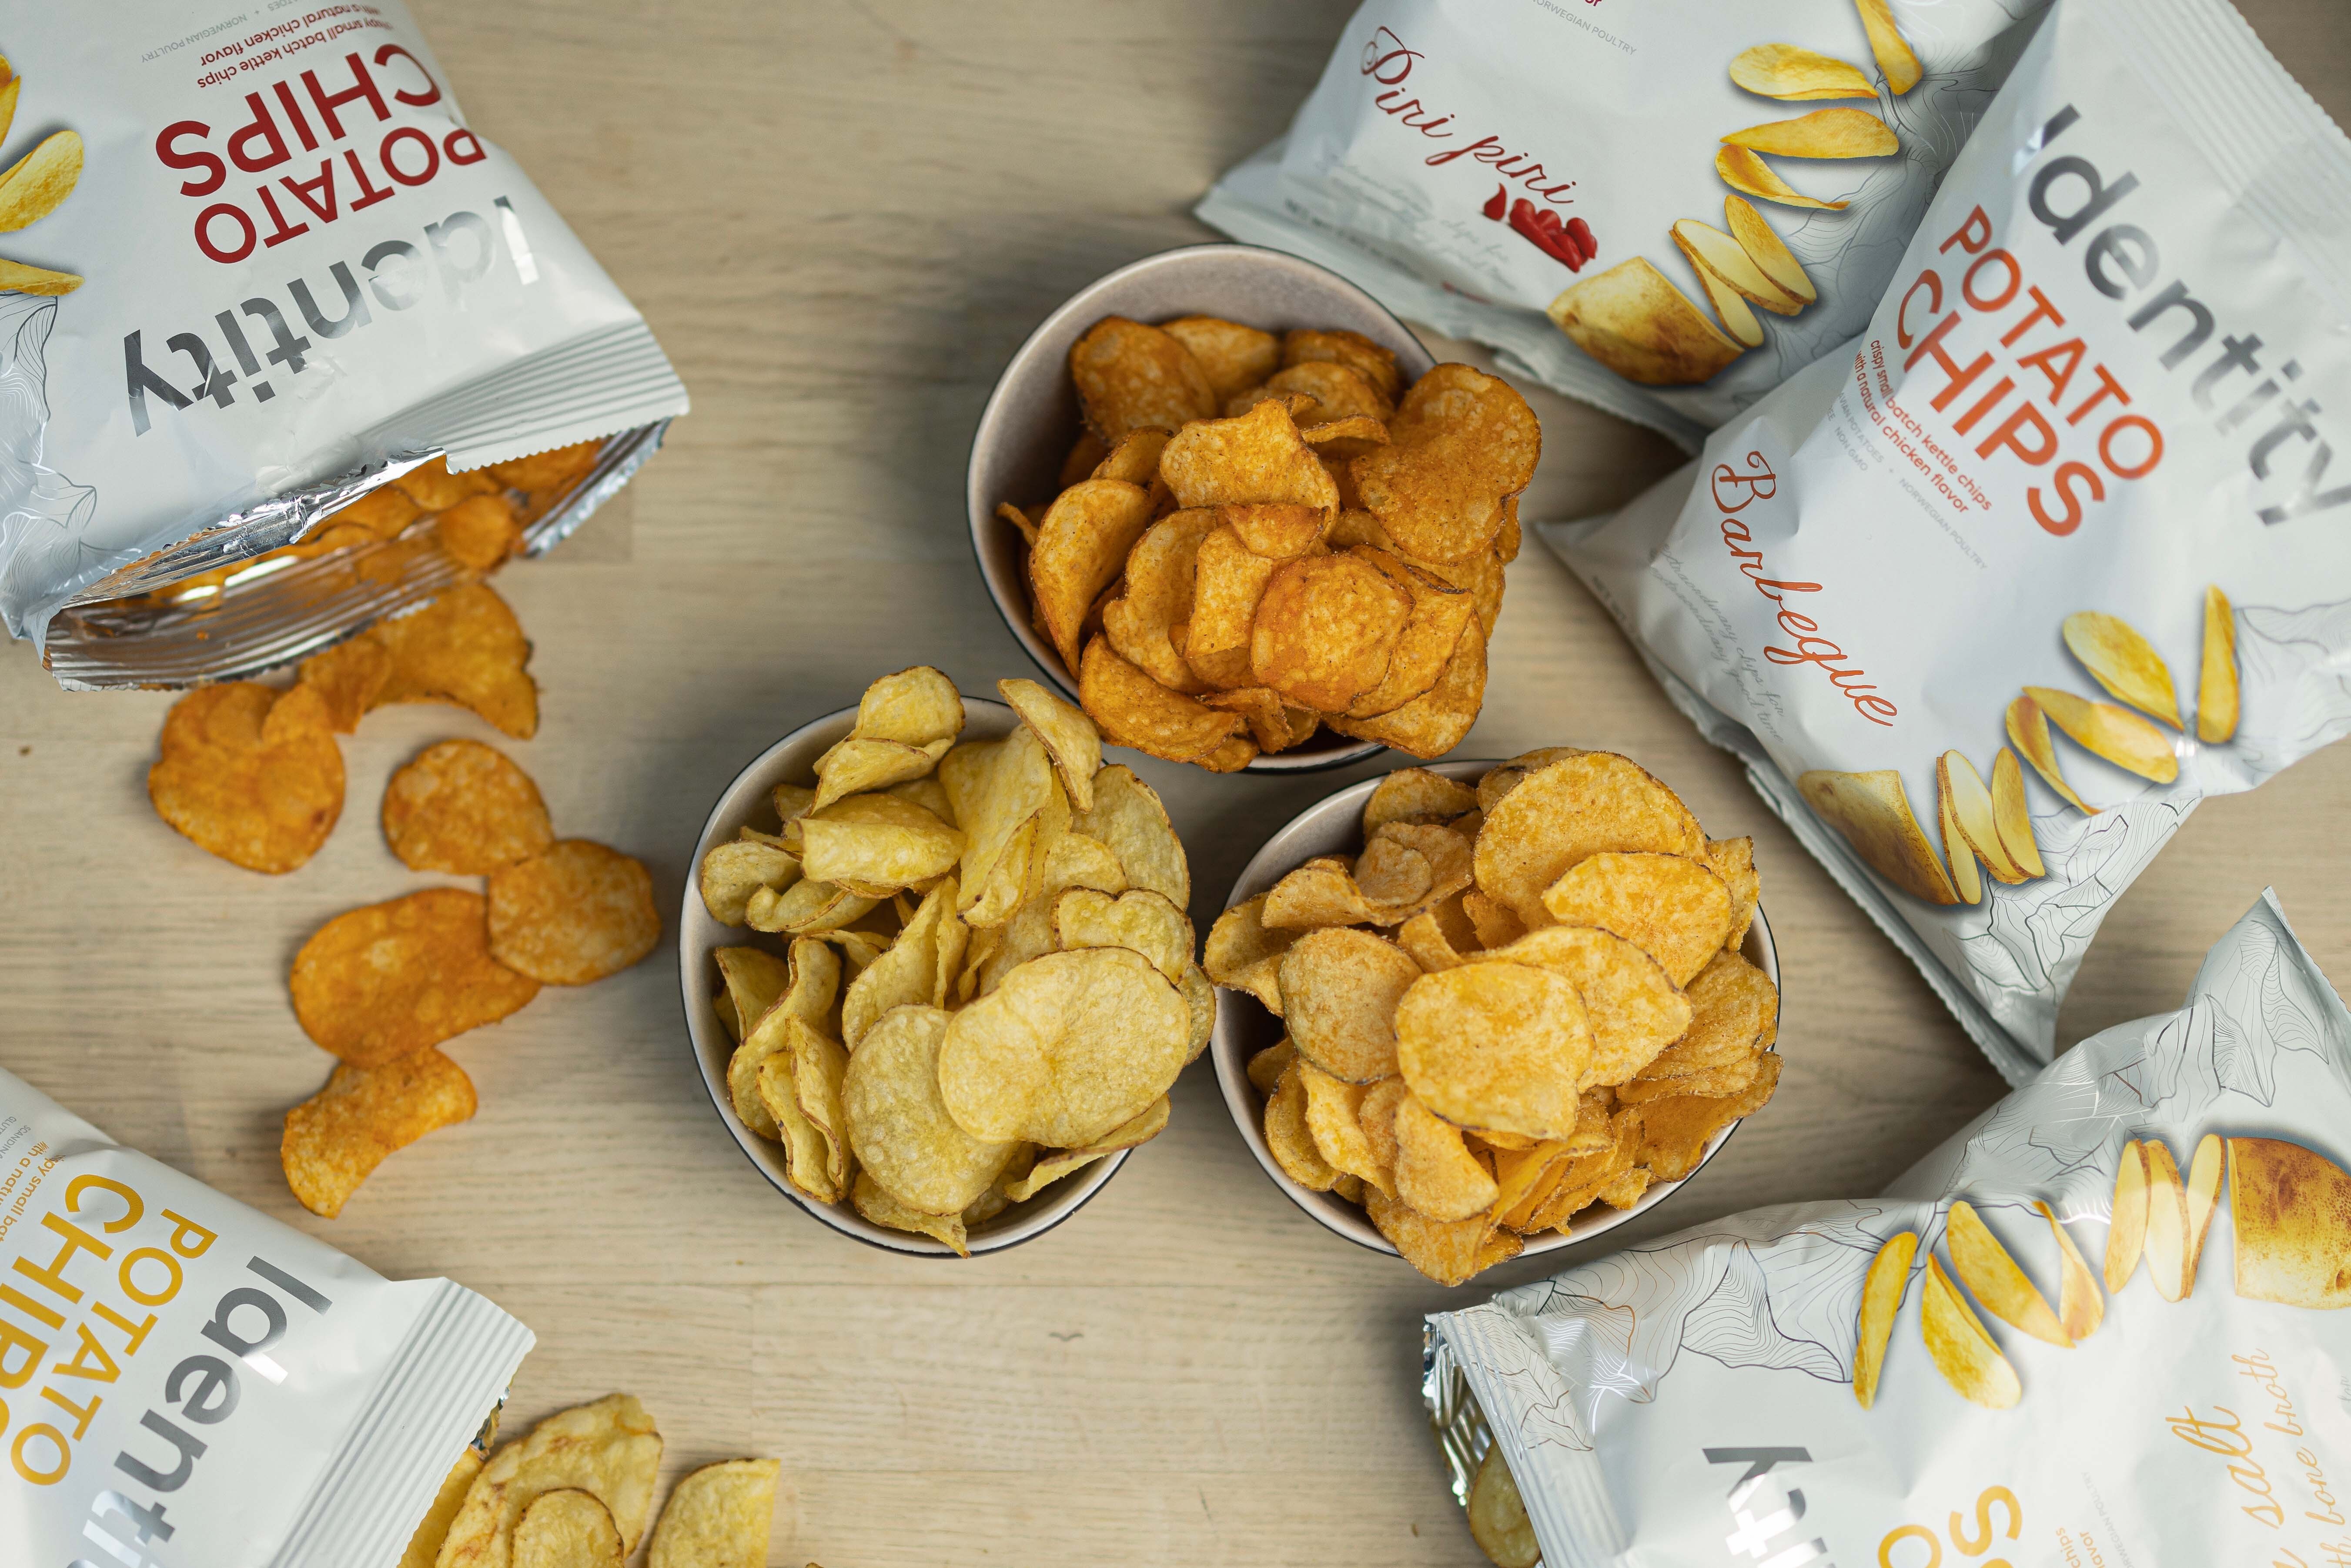 Three bowls filled with potato crisps in different flavors seen from above.